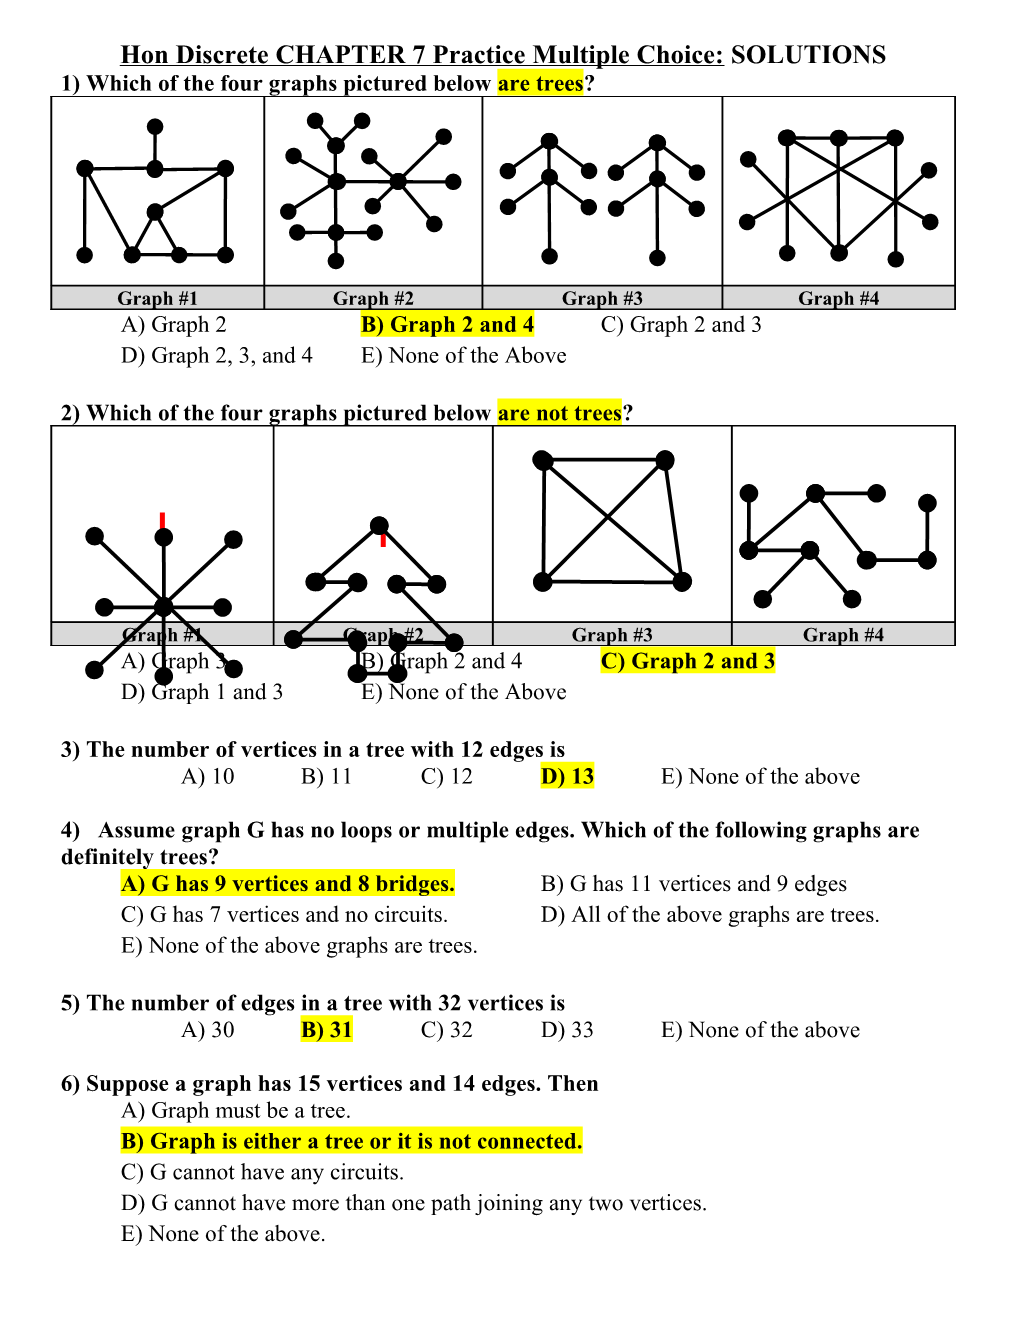 Hon Discrete CHAPTER 7 Practice Multiple Choice: SOLUTIONS